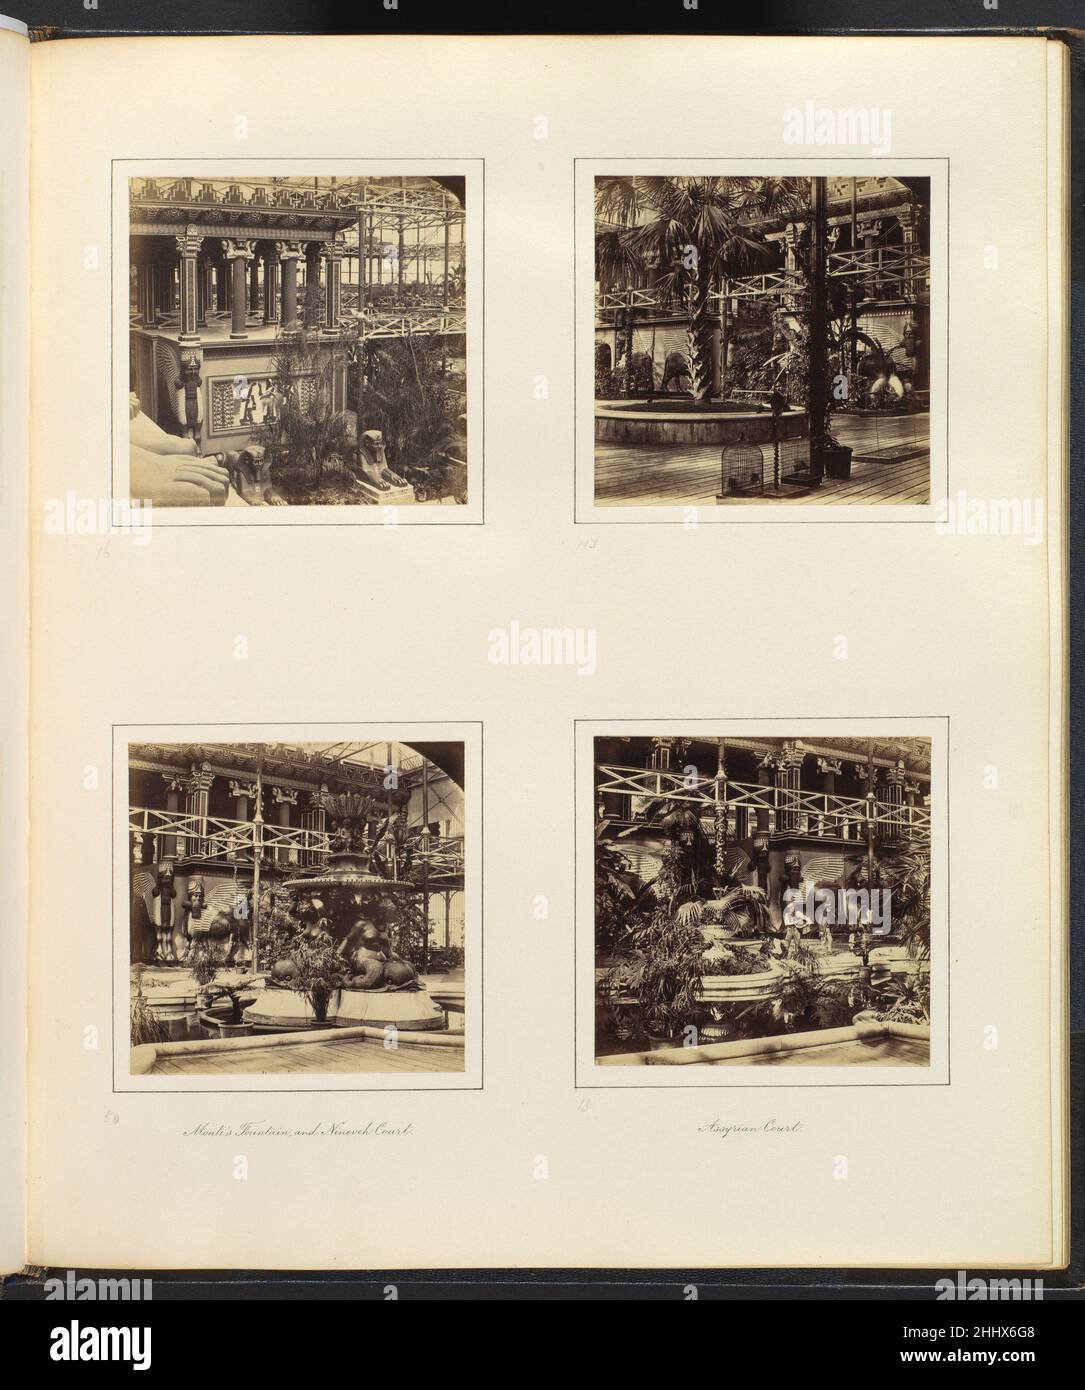 [Elevated View of Egyptian Court; Ninevah Court; Monti's Fountain, and Ninevah Court; Assyrian Court with Workers] ca. 1859 Attributed to Philip Henry Delamotte British. [Elevated View of Egyptian Court; Ninevah Court; Monti's Fountain, and Ninevah Court; Assyrian Court with Workers]  285799 Stock Photo